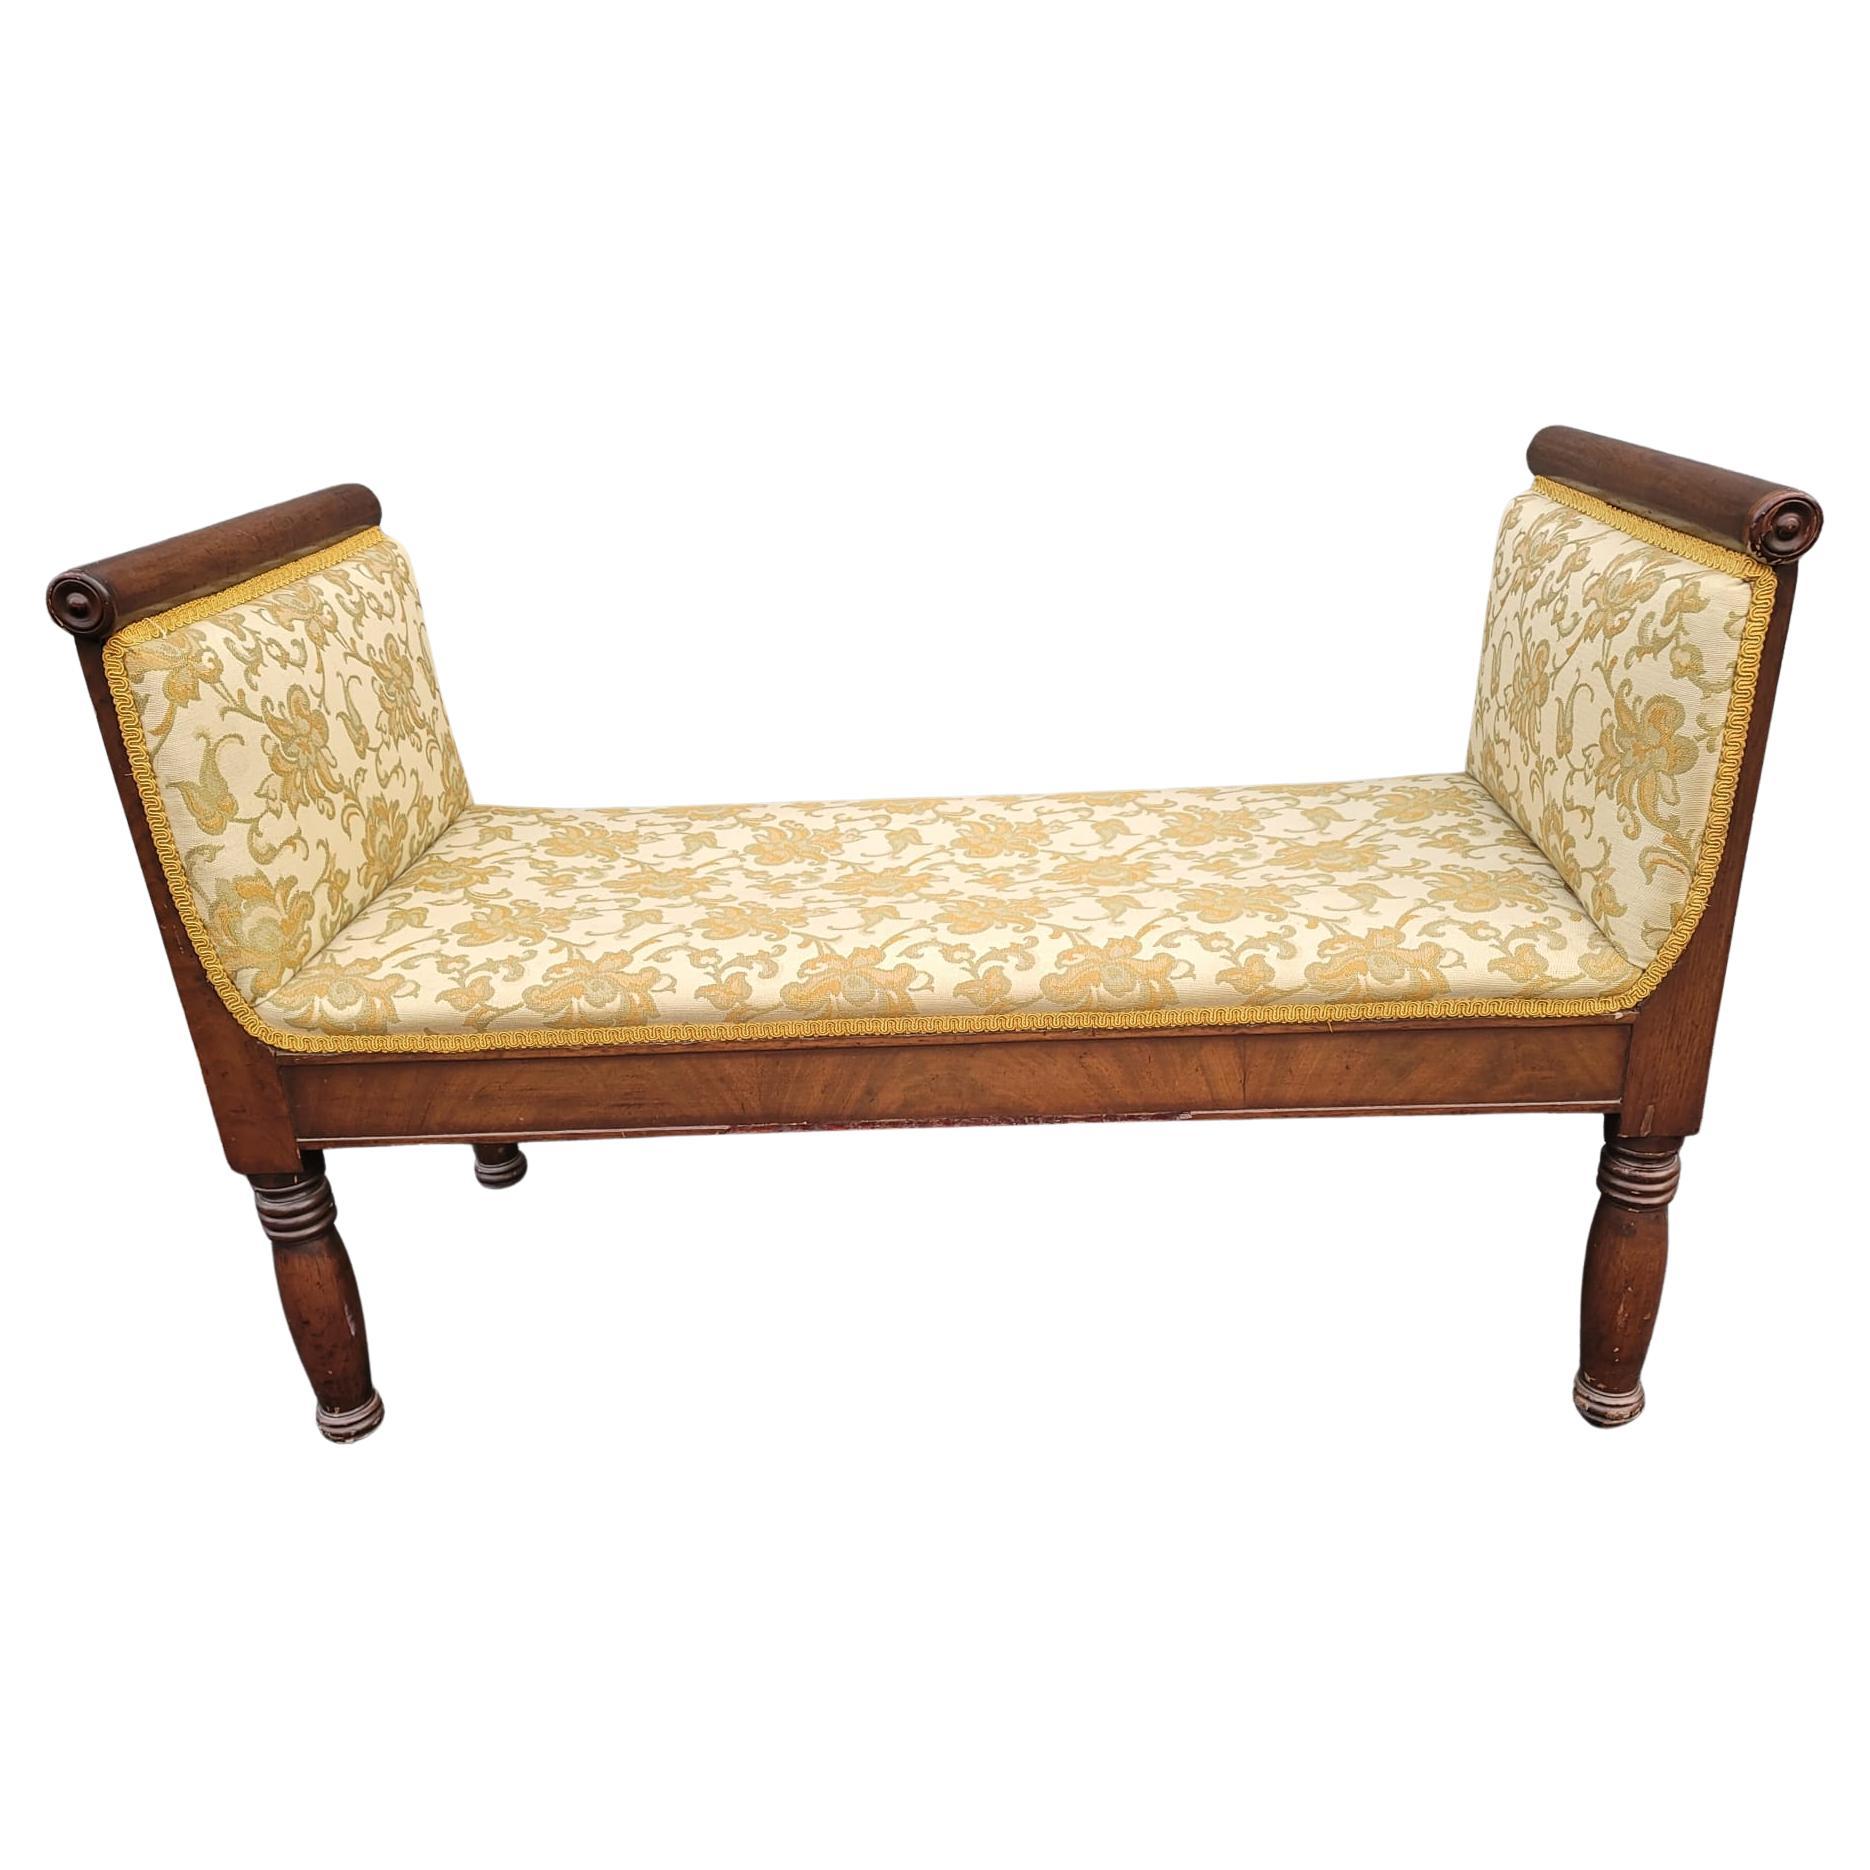 Late 19th Century Federal Walnut and Upholstered Window bench with Yellowish gold color upholstery and burl walnut front panel. It measures 40